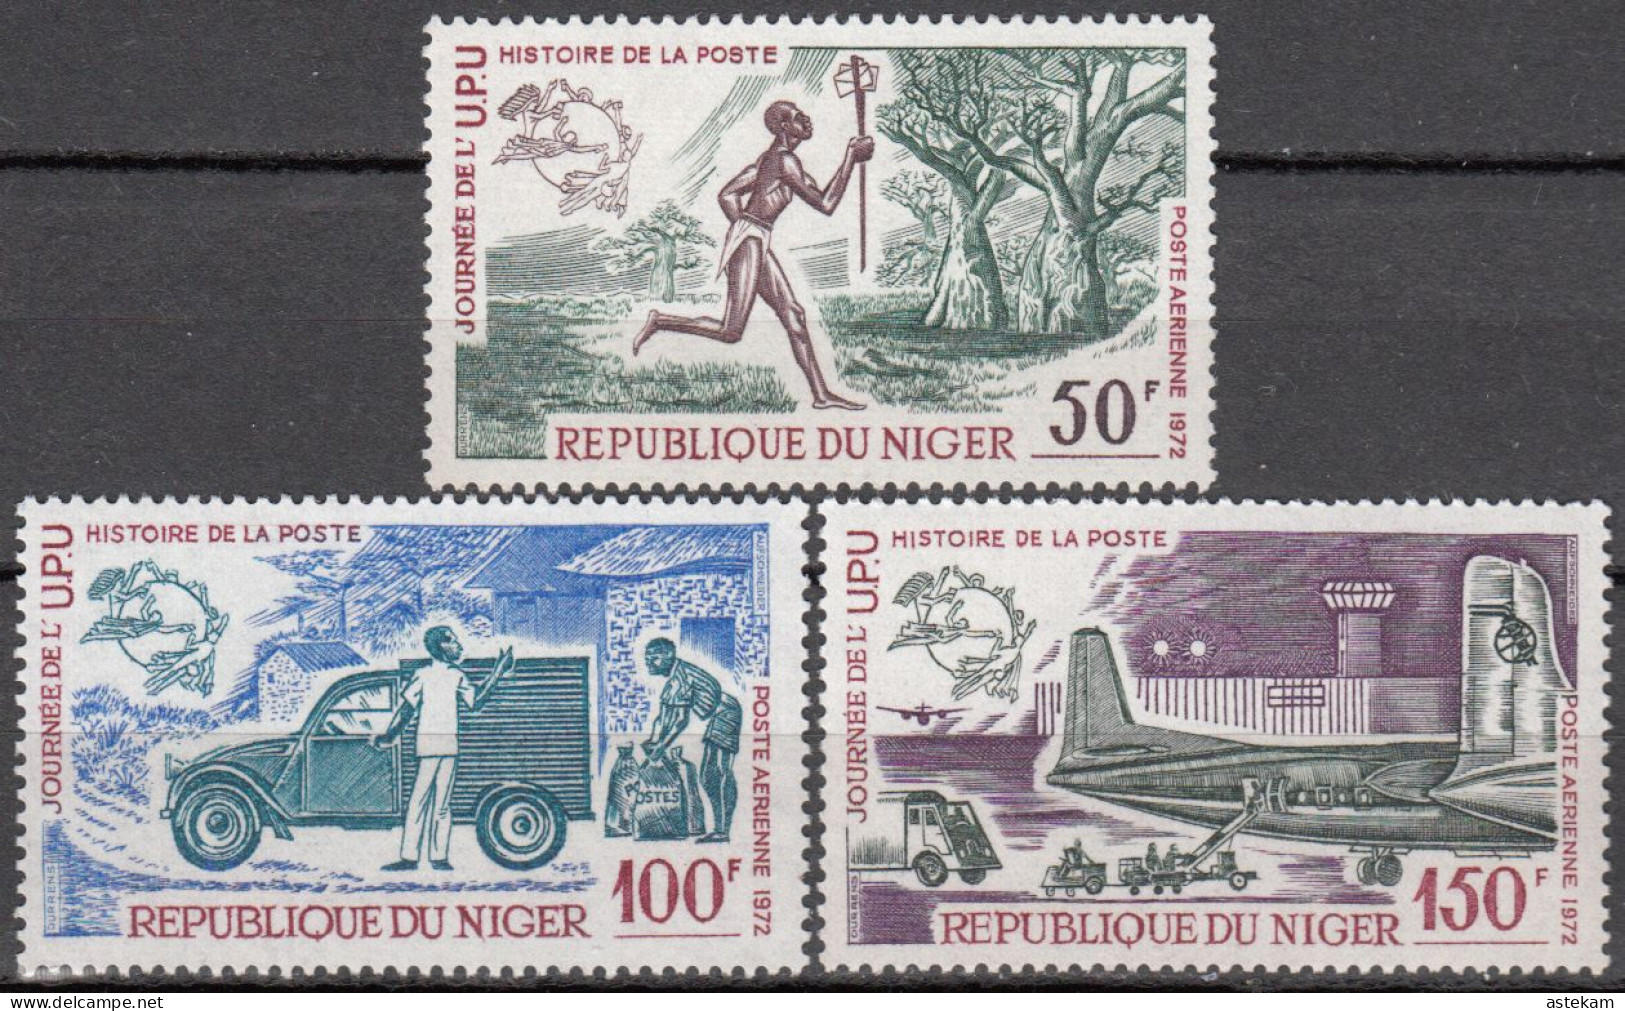 NIGER 1972, UPU, POSTAL TRANSPORT, AIRPLANES, COMPLETE MNH SERIES With GOOD QUALITY, *** - Niger (1960-...)